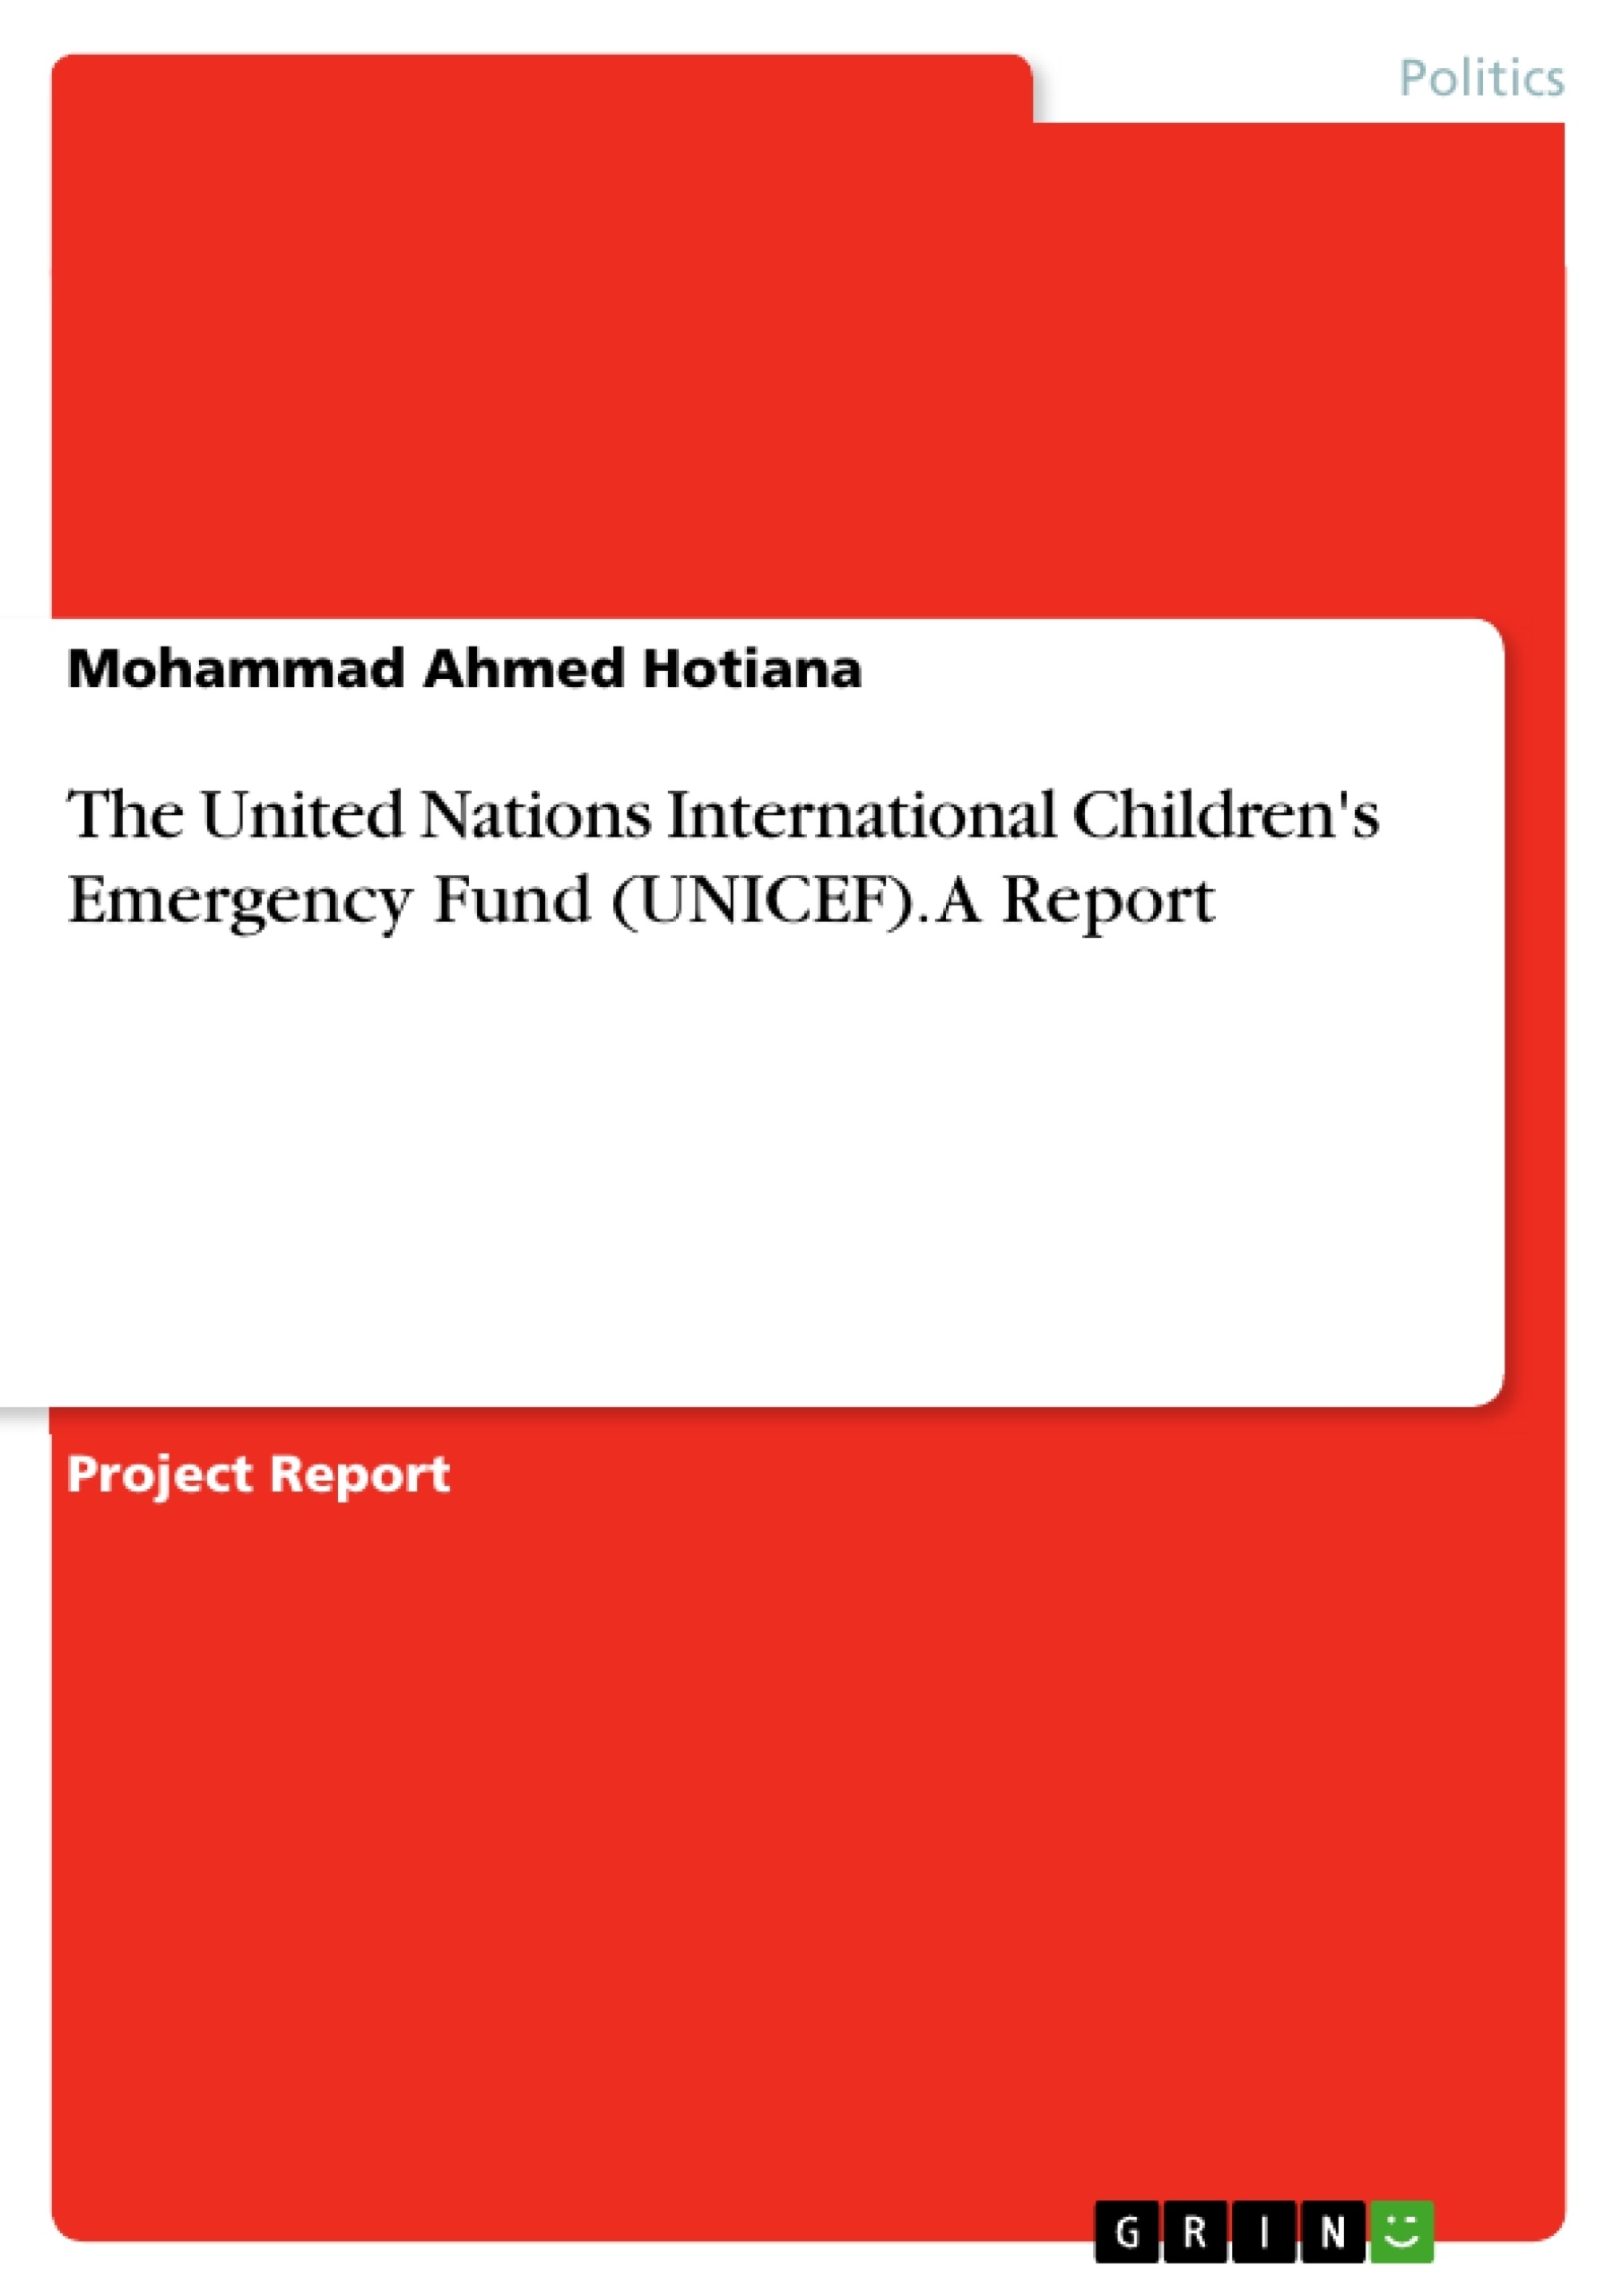 Title: The United Nations International Children's Emergency Fund (UNICEF). A Report